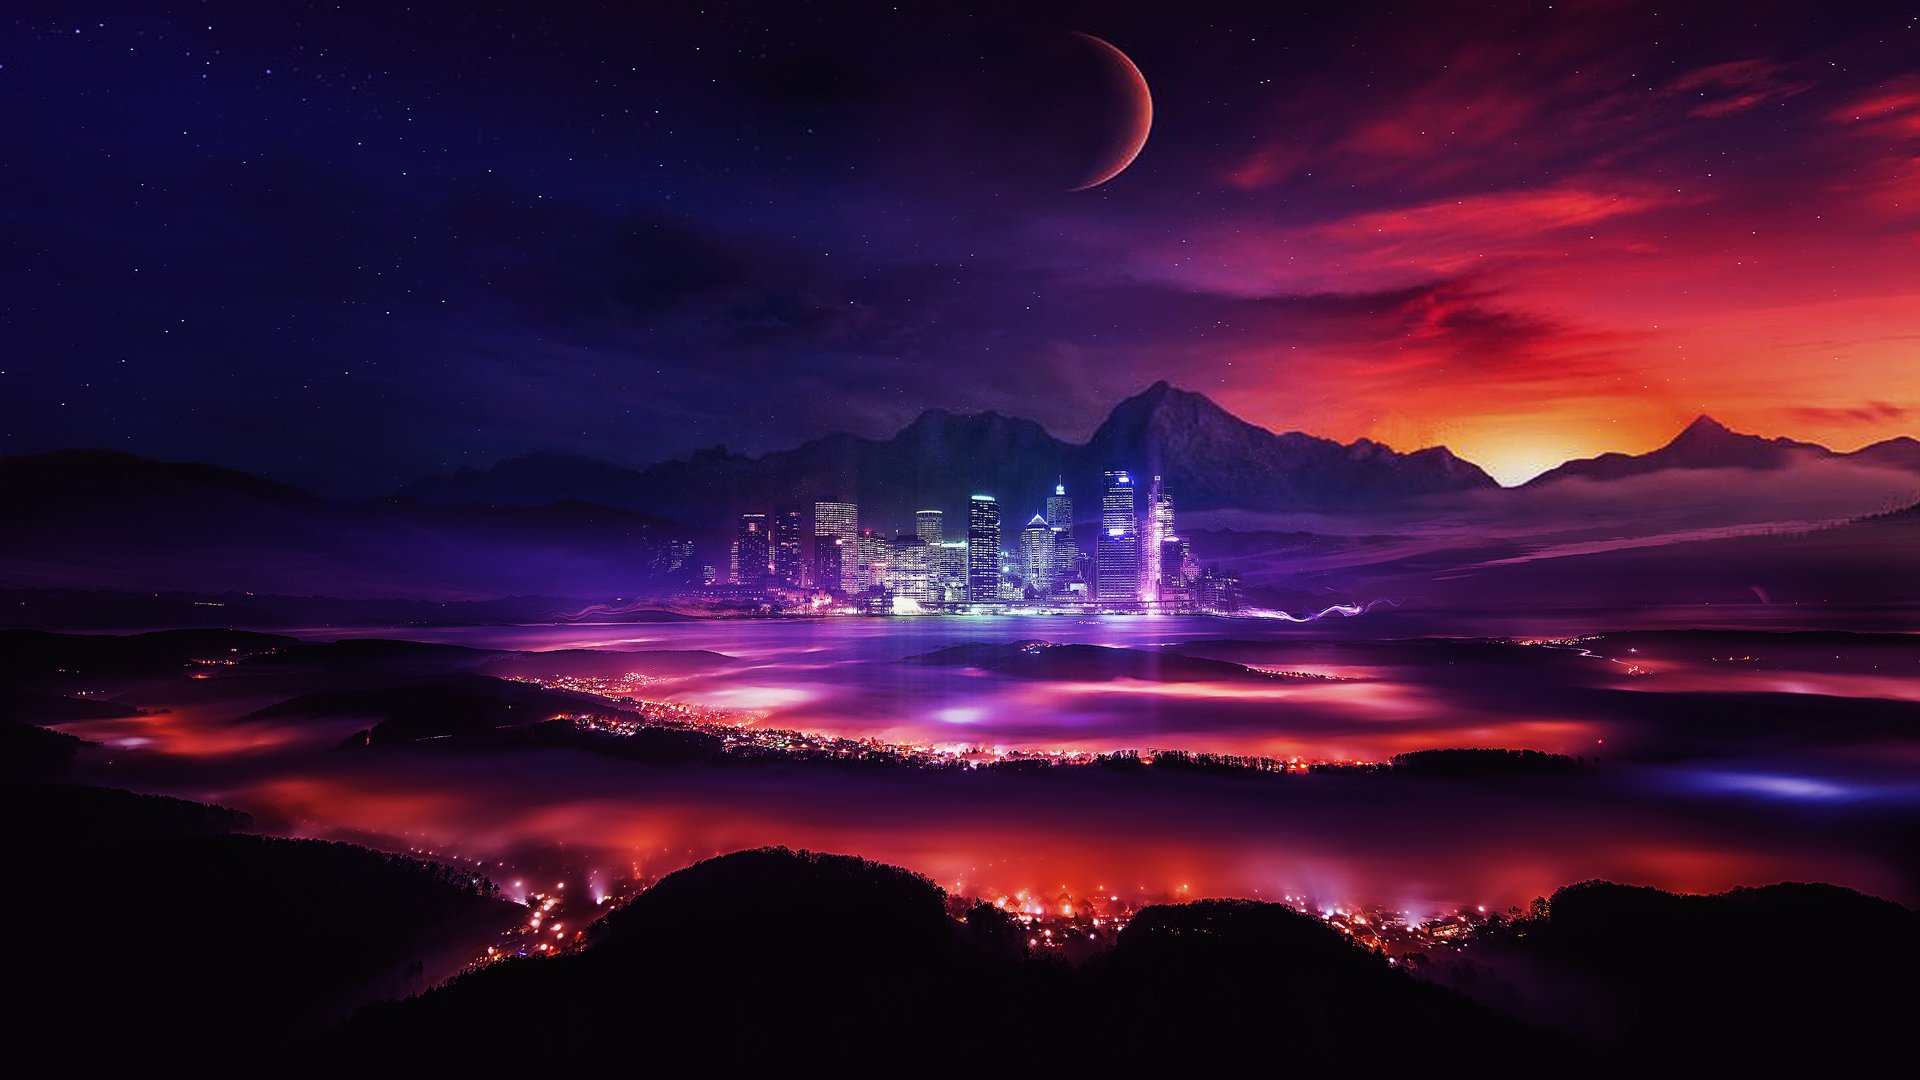 Wallpaper, planet, Moon, stars, space, mountains, lights, night sky, city, panoramic view, colorful 1920x1080